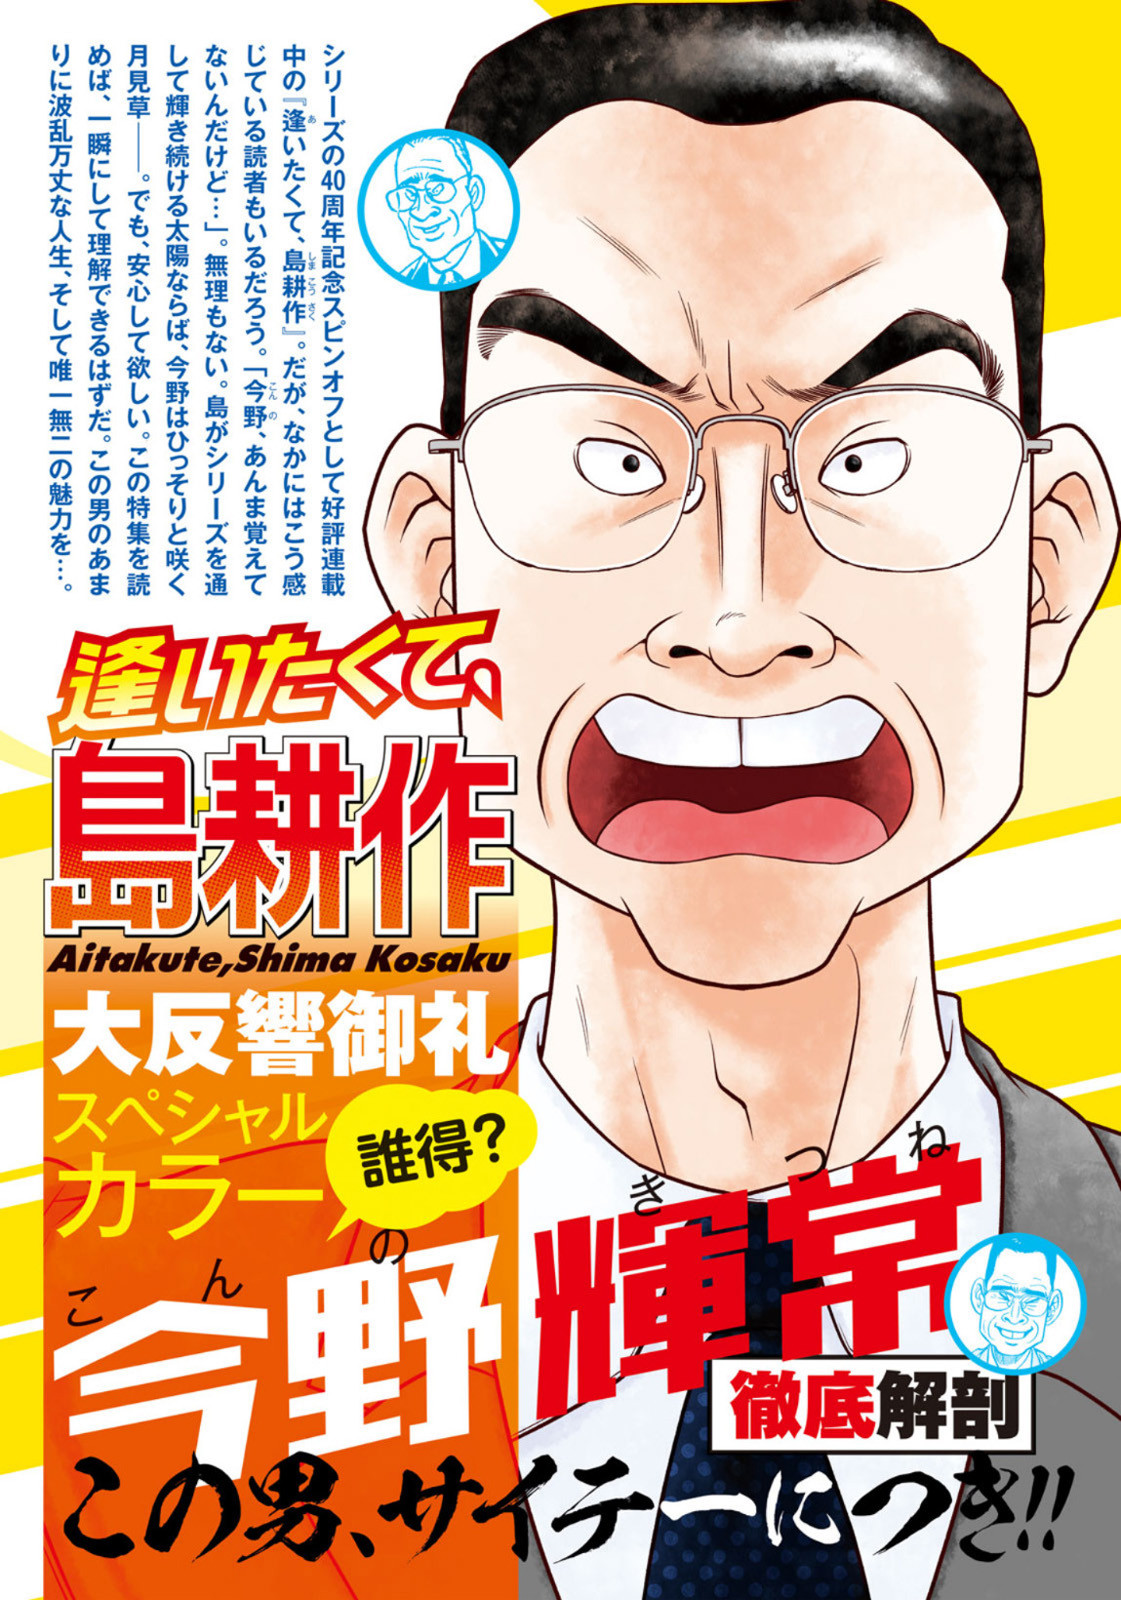 Weekly Morning - 週刊モーニング - Chapter 2023-24 - Page 3